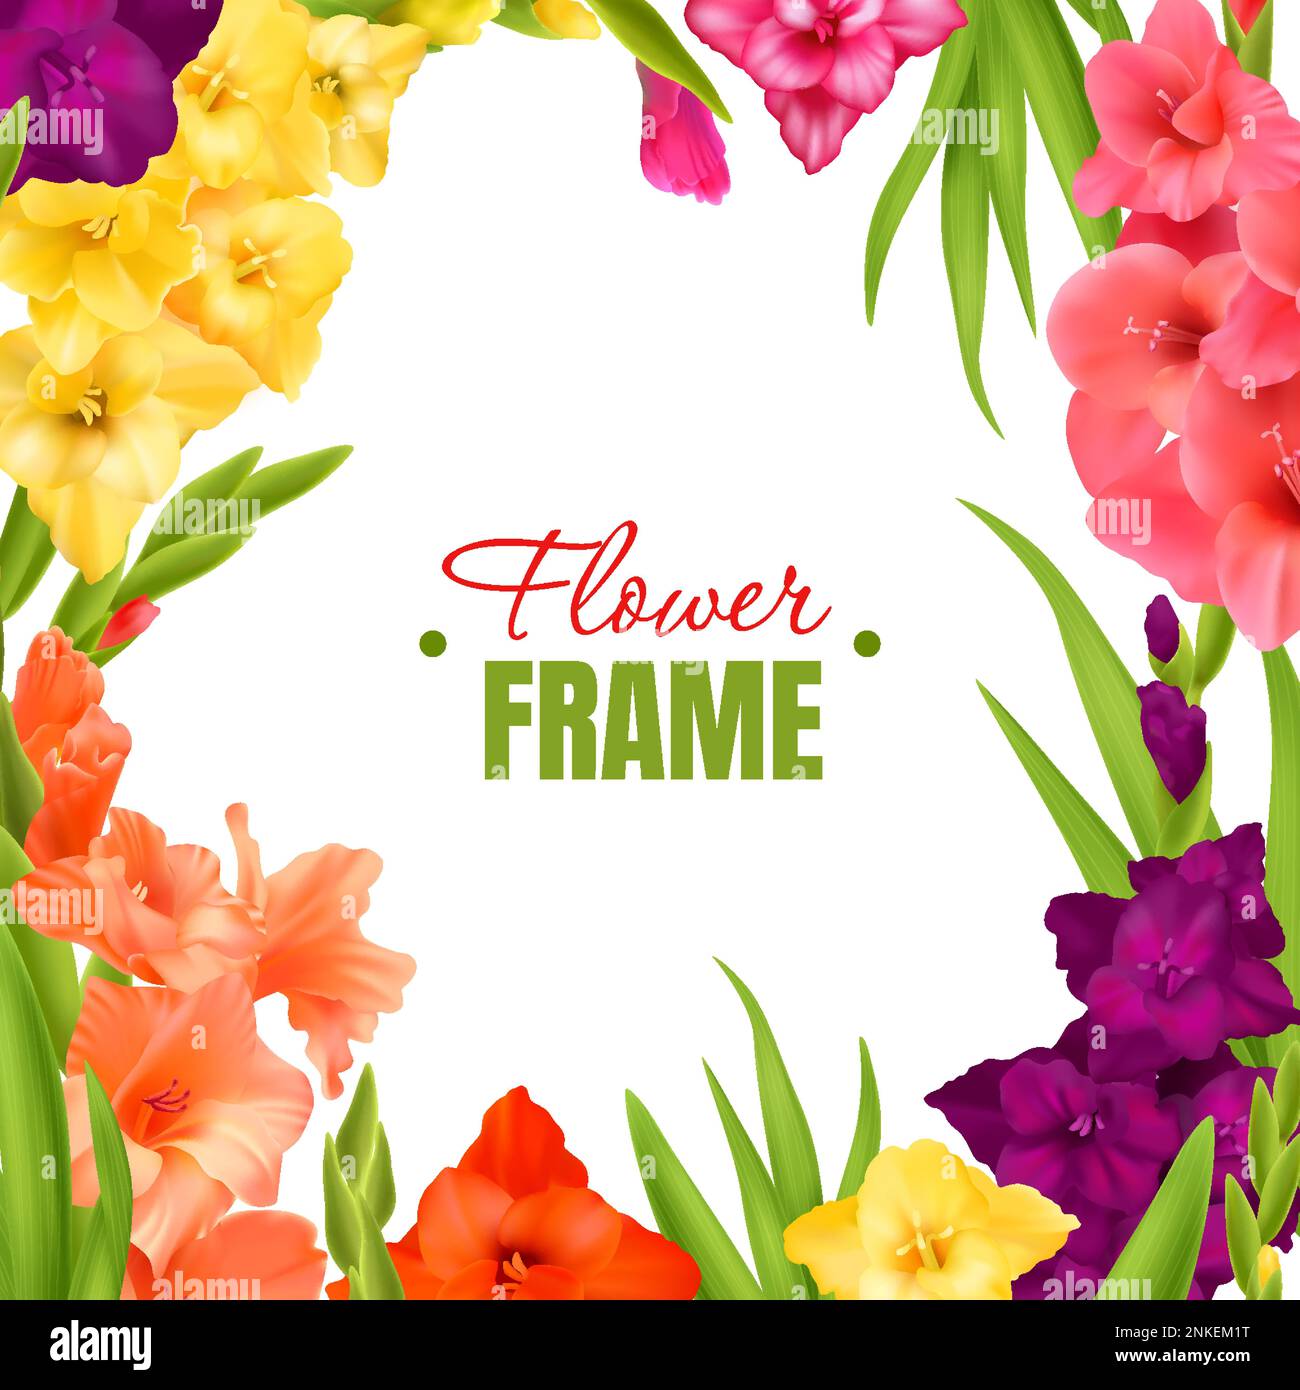 Realistic gladiolus frame with blooming flowers of different colors and green leaves vector illustration Stock Vector